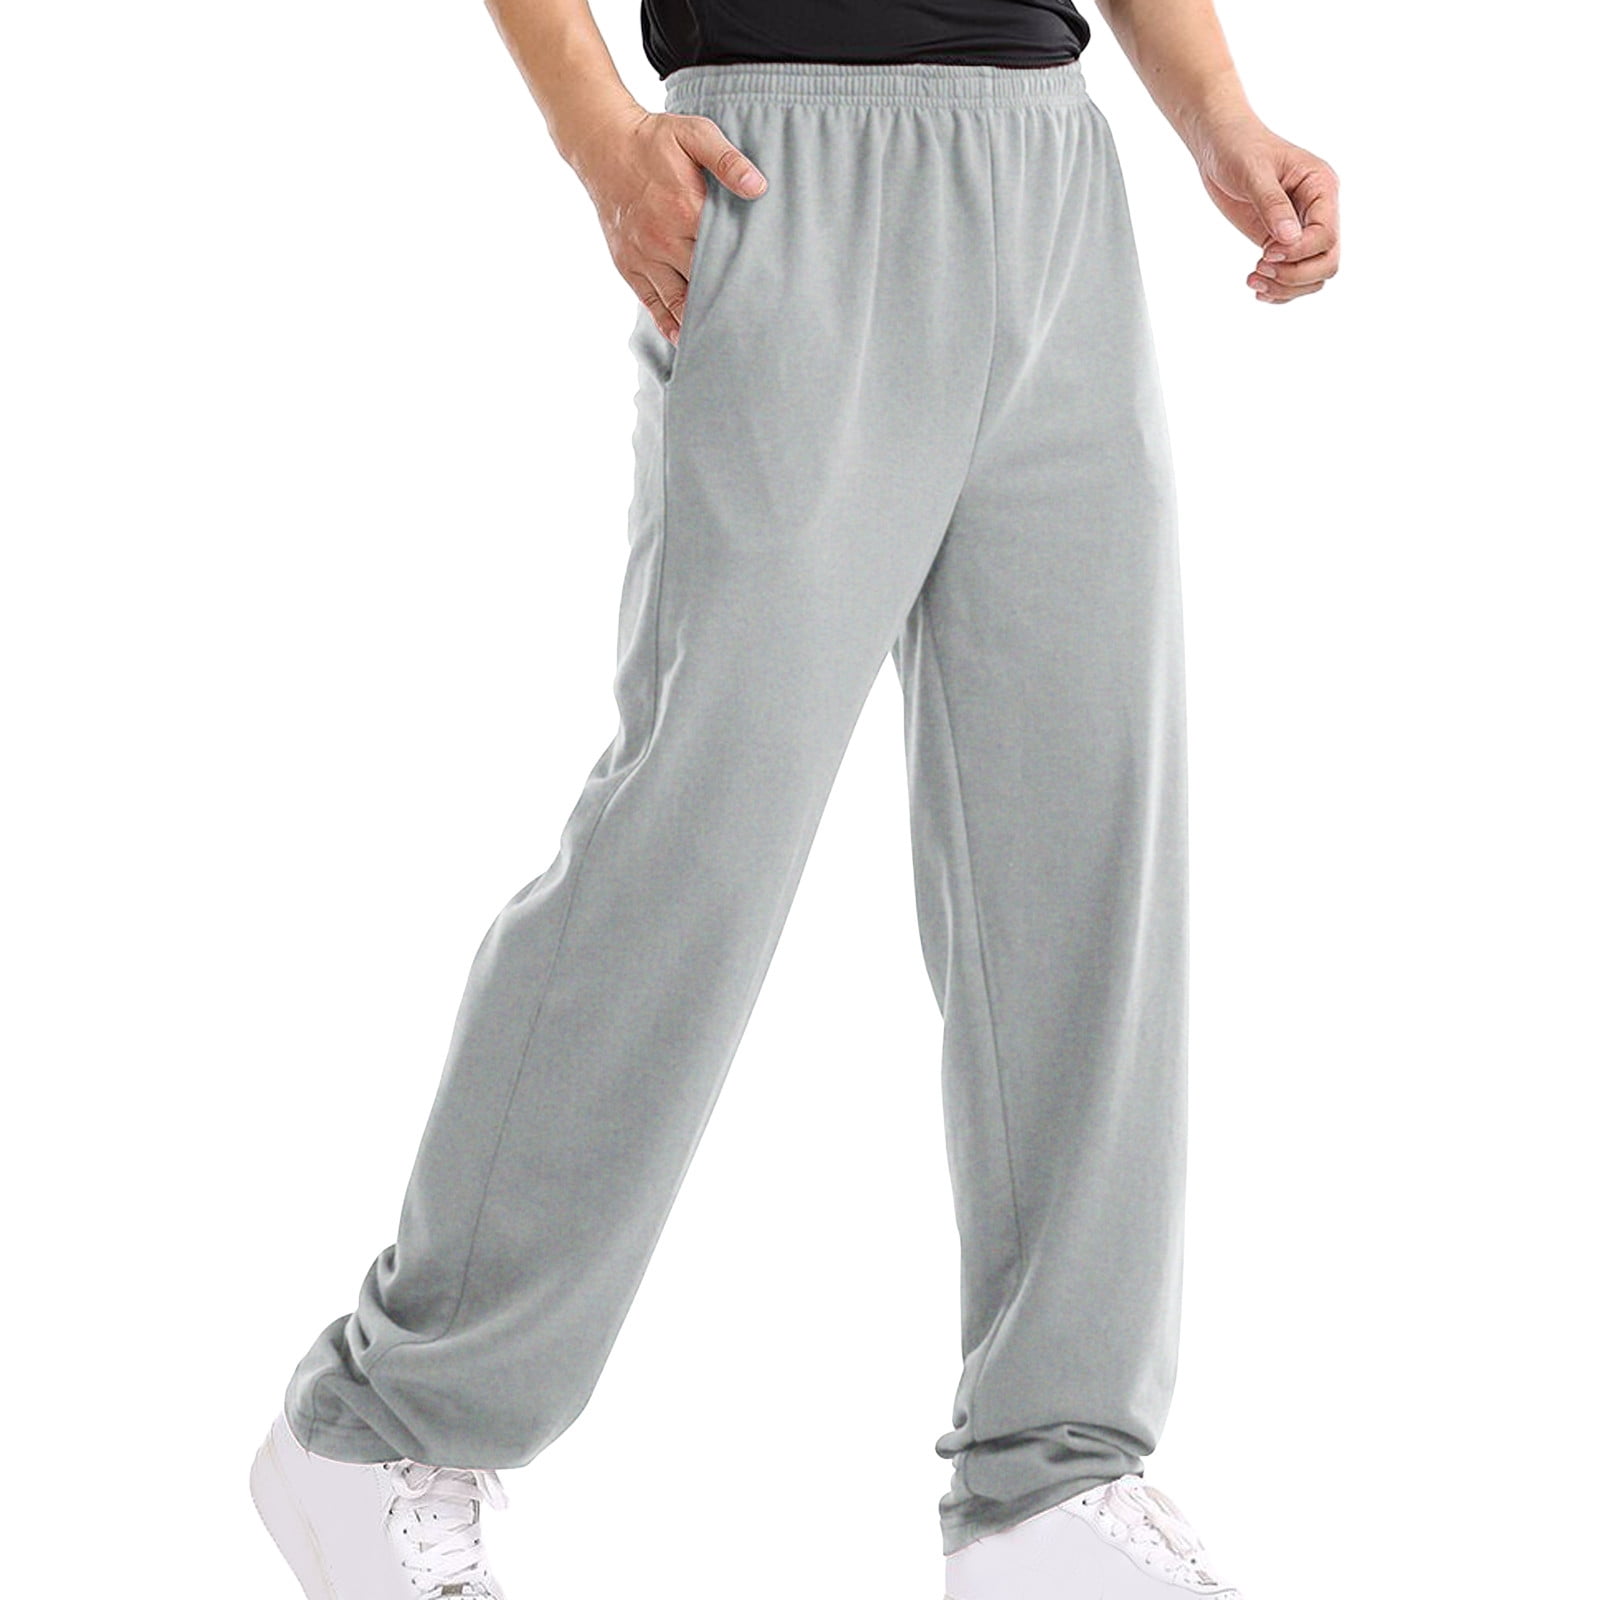 Grey Sweatpants For Men Mens Autumn And Winter High Street Fashion